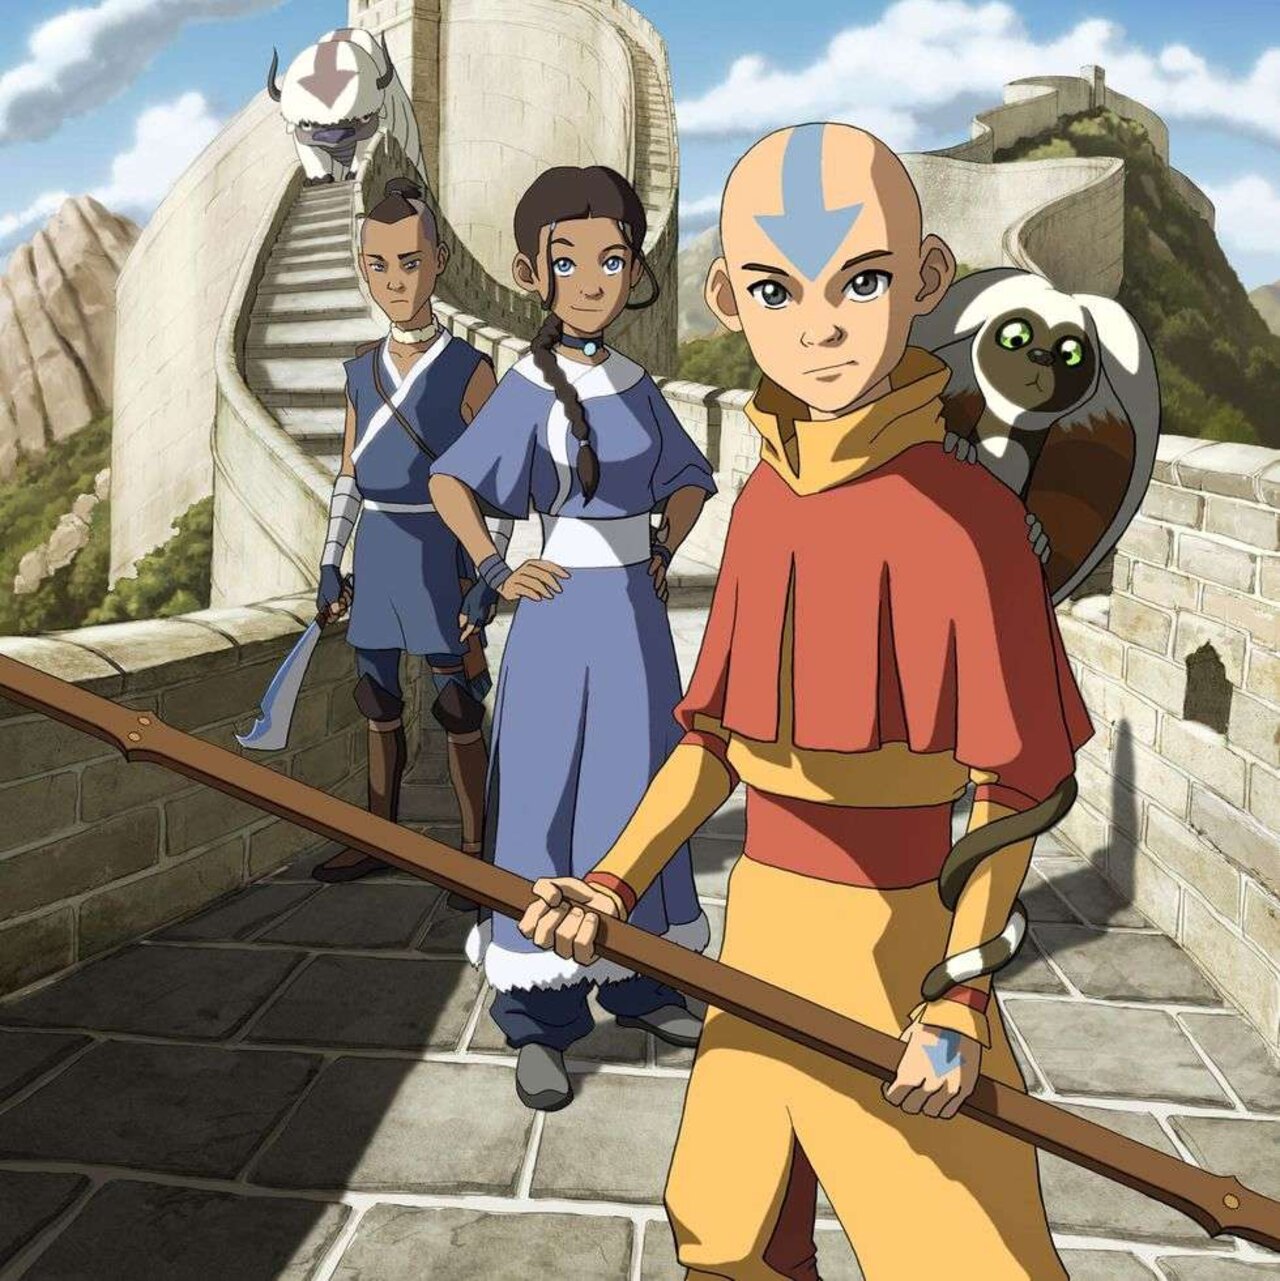 11 Shows Like Avatar The Last Airbender to Watch If You Like Avatar The  Last Airbender  TV Guide